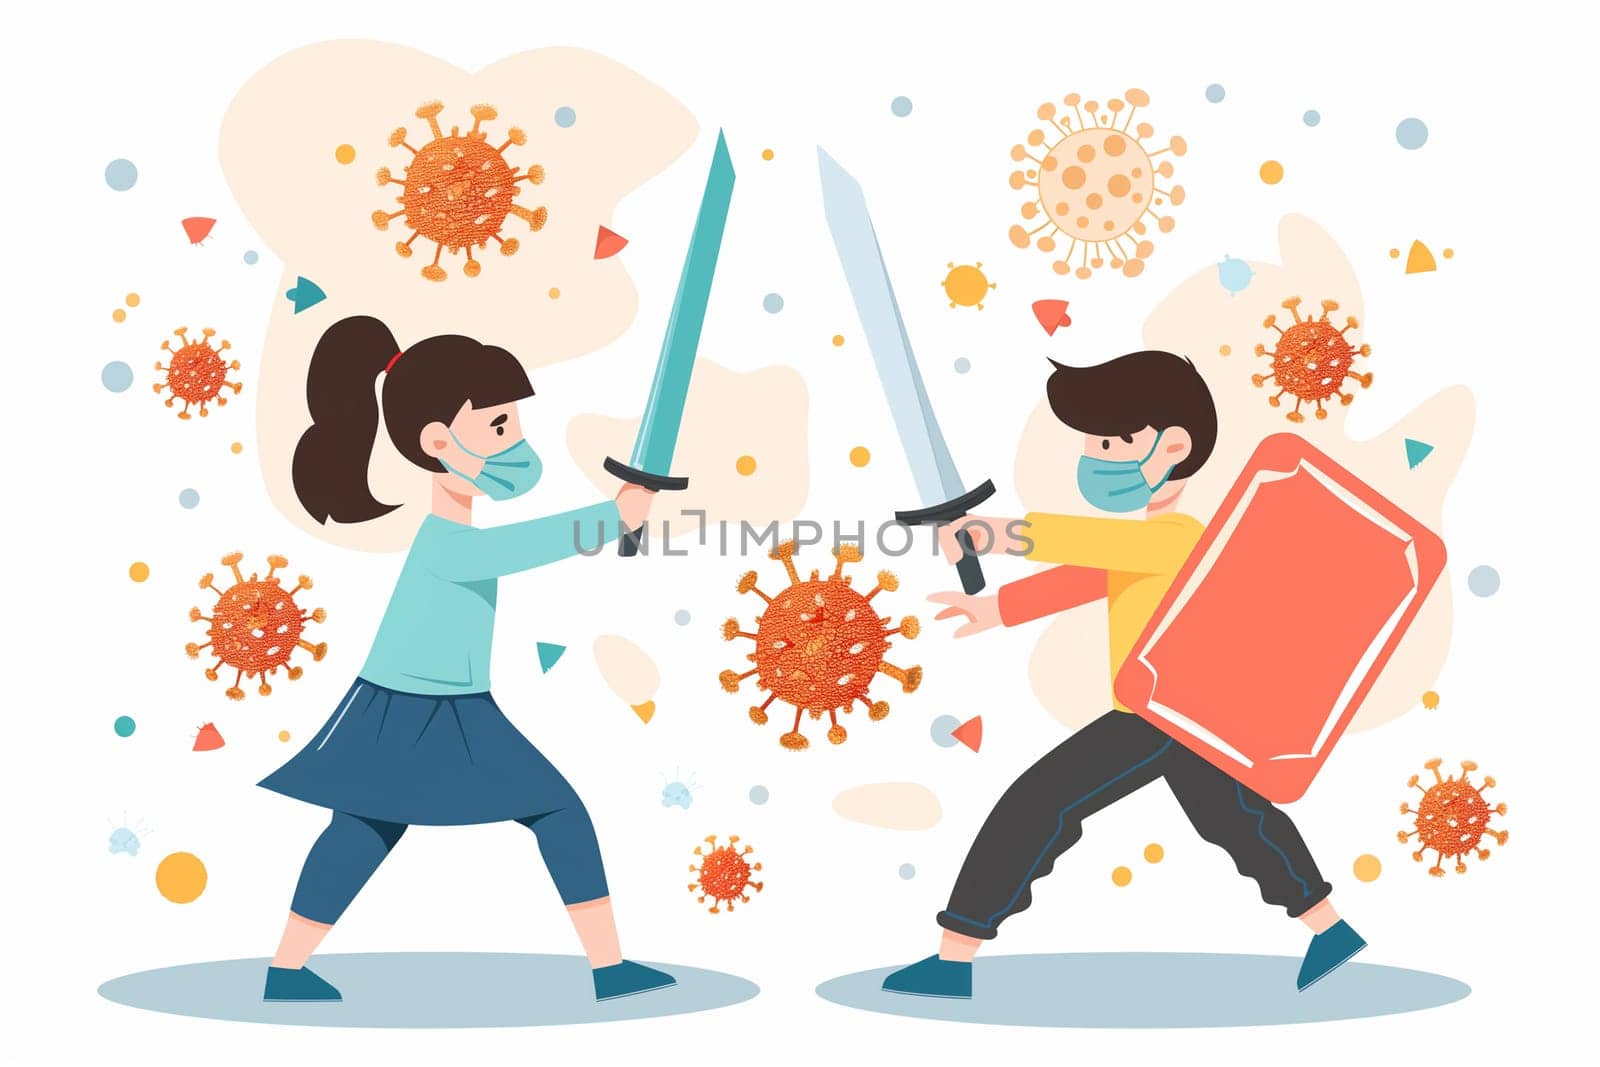 Two individuals engaged in a sword fight, standing in front of a backdrop of menacing coronavirus particles.